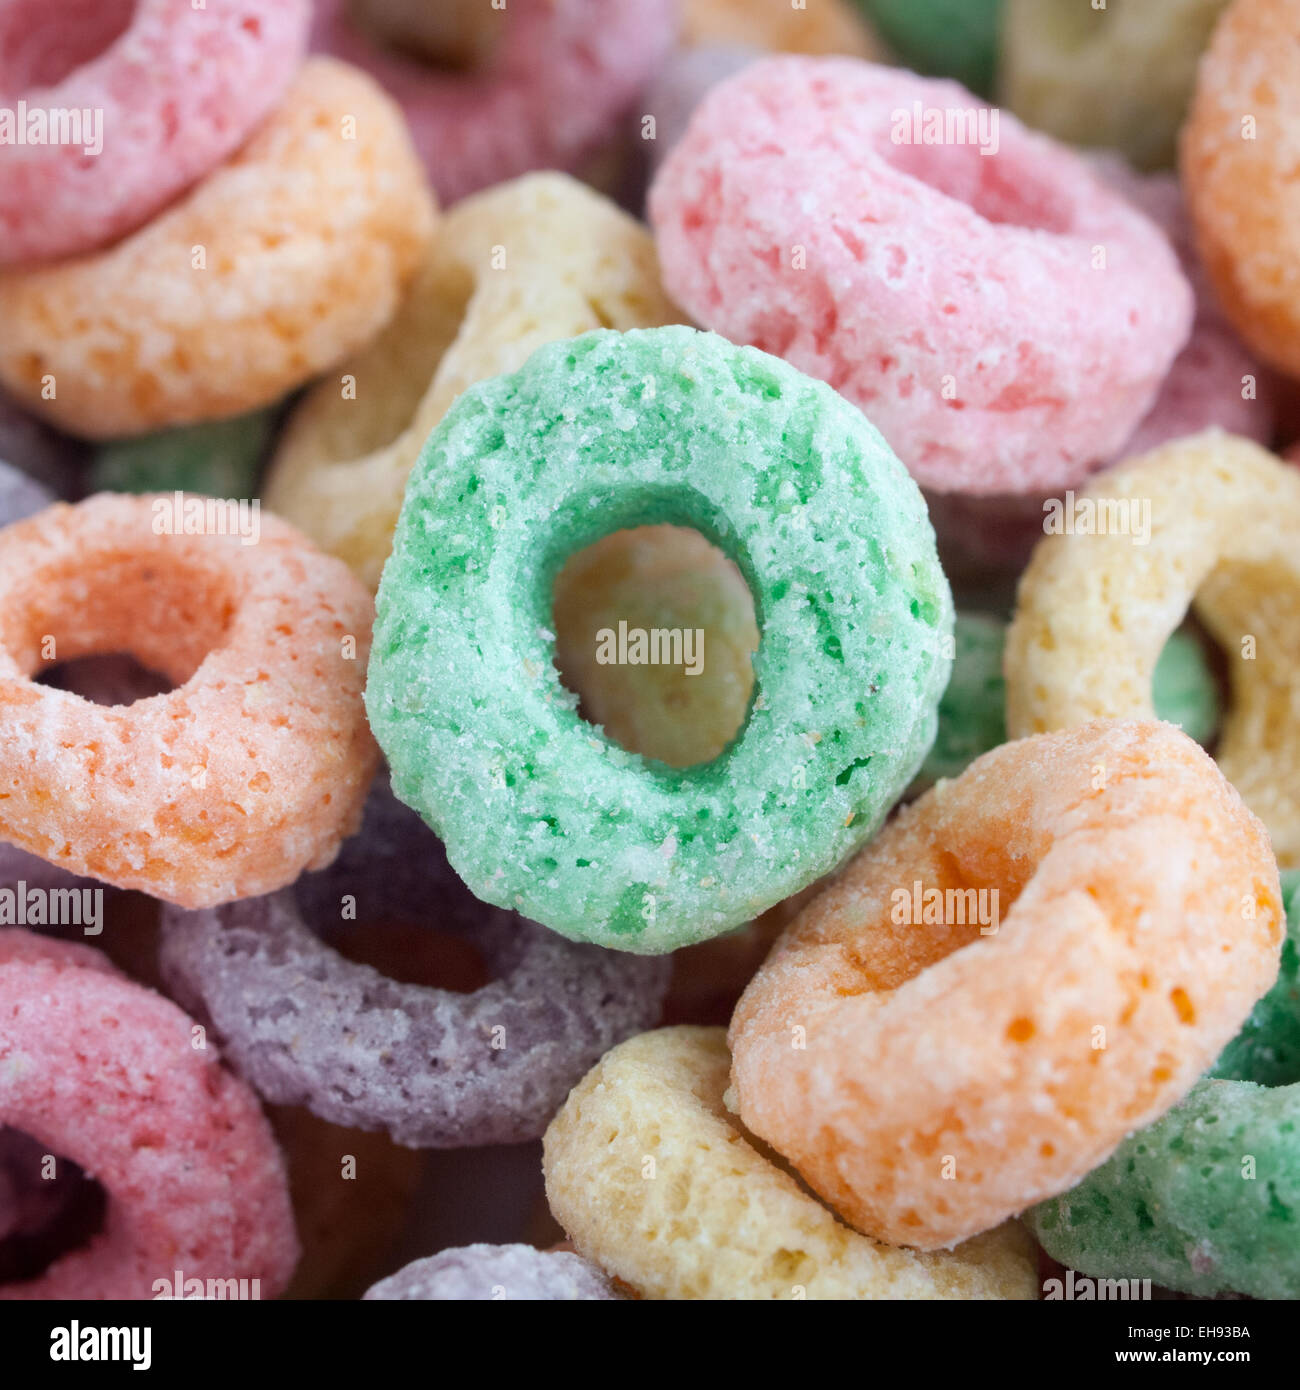 A close-up of Kellogg's Froot Loops cereal.  Canadian version of Froot Loops shown. Stock Photo